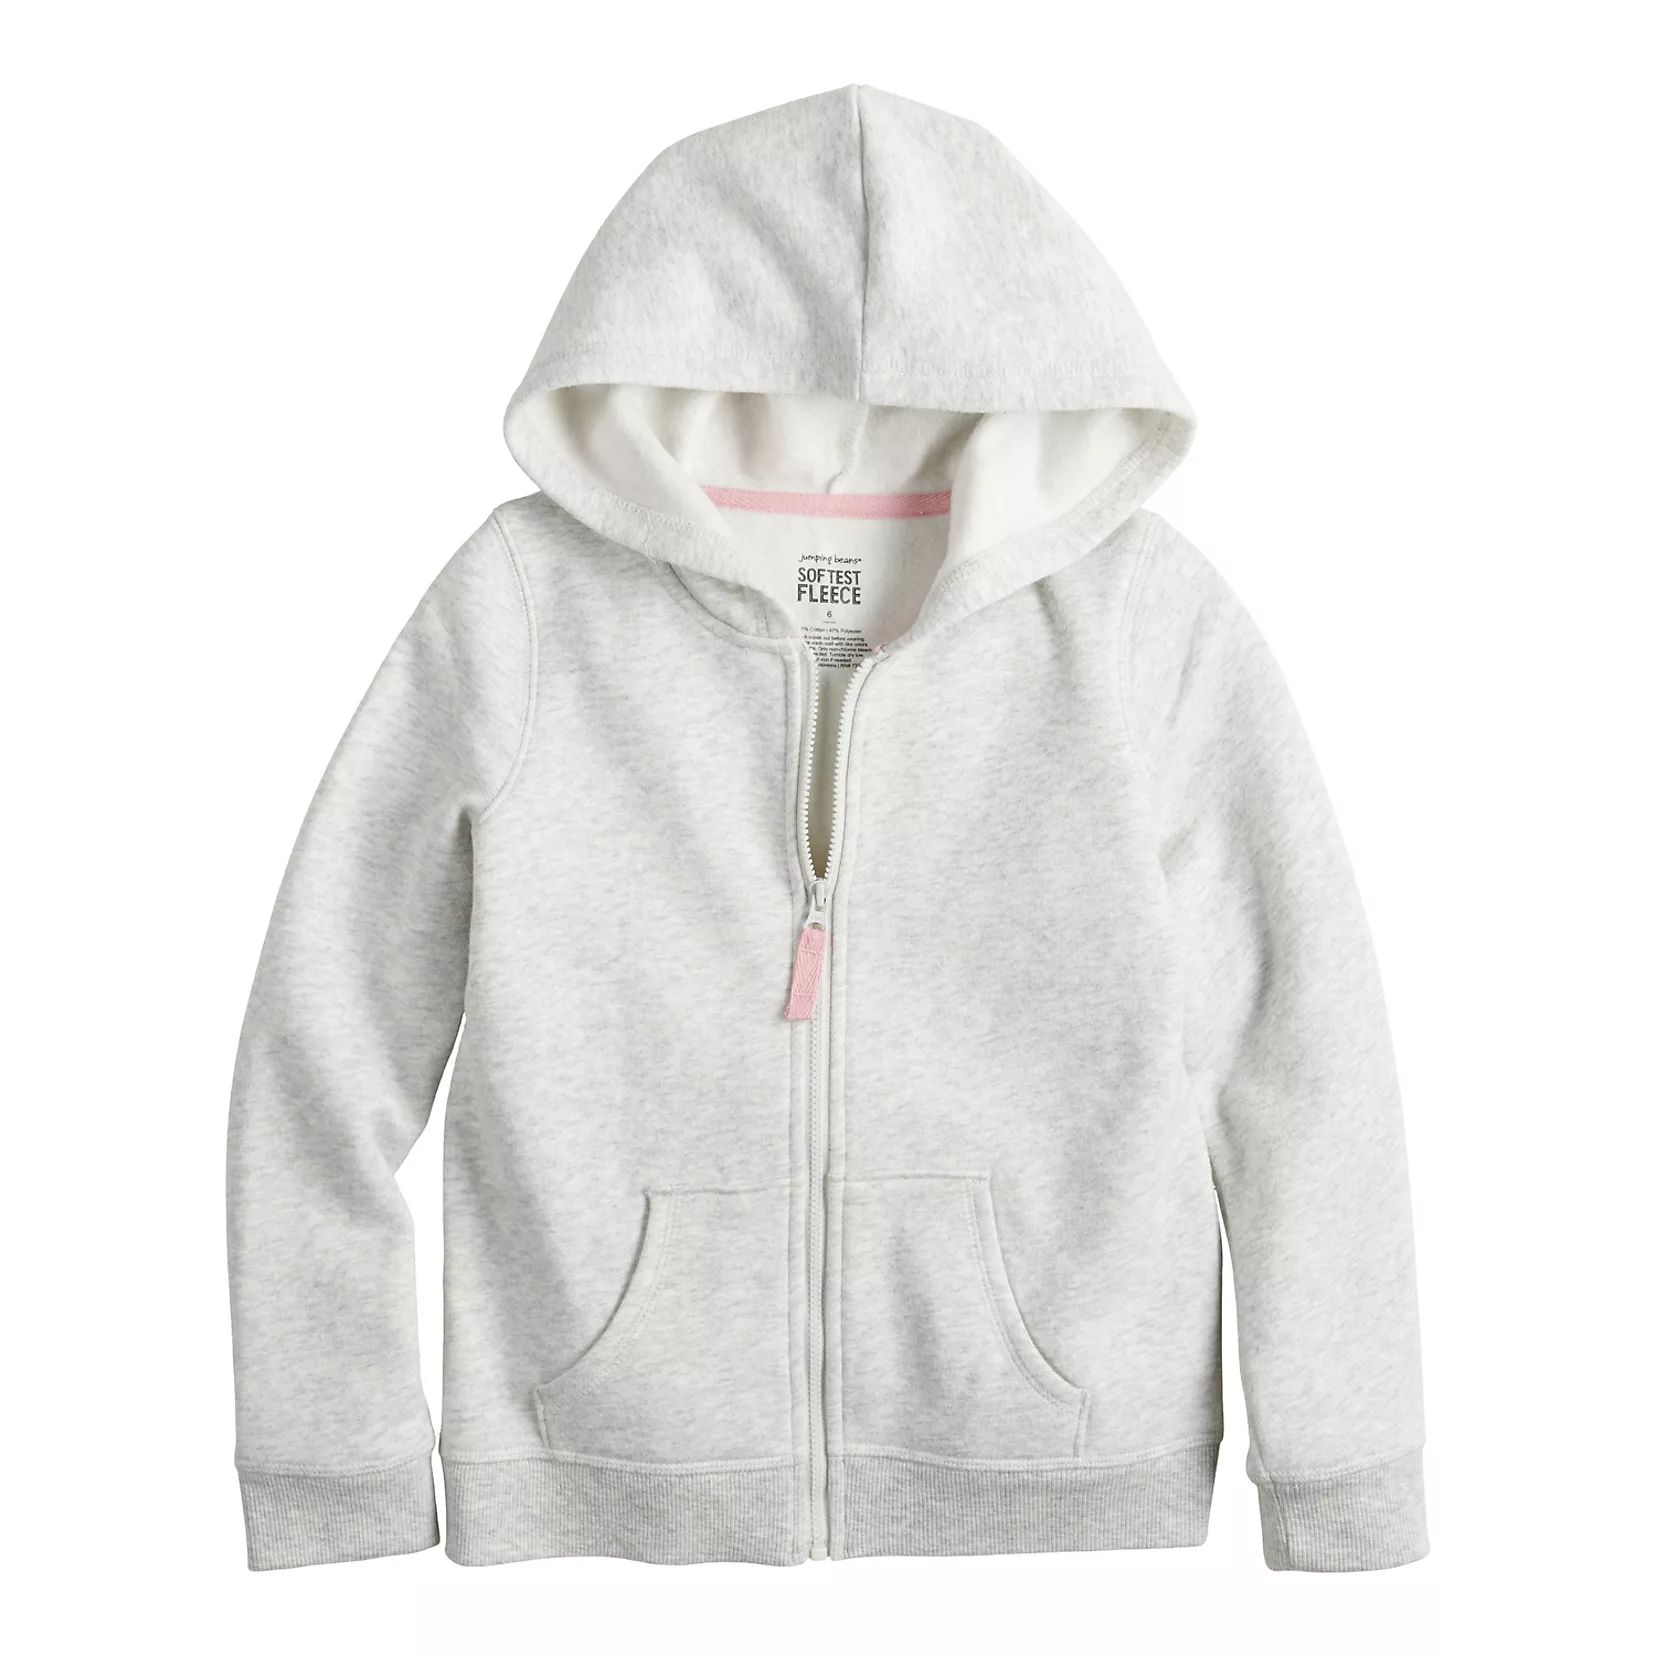 Girls 4-12 Jumping Beans® Core Zip-Up Hoodieby Jumping Beans(246 reviews) | Kohl's